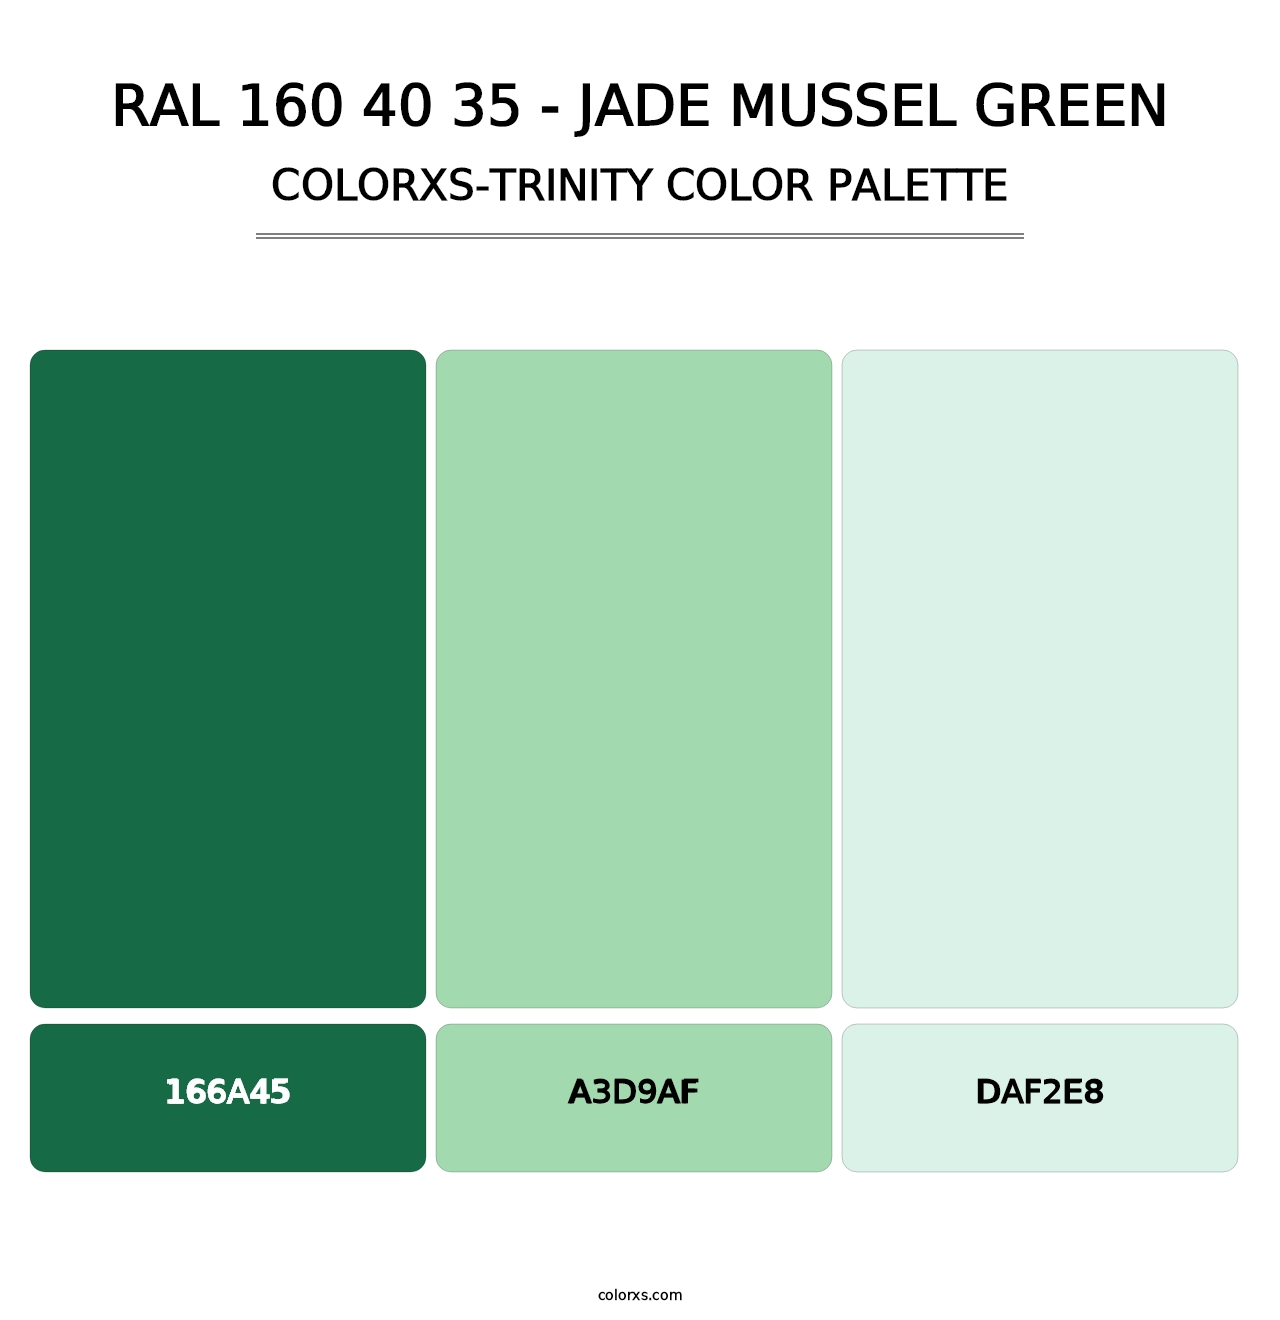 RAL 160 40 35 - Jade Mussel Green - Colorxs Trinity Palette